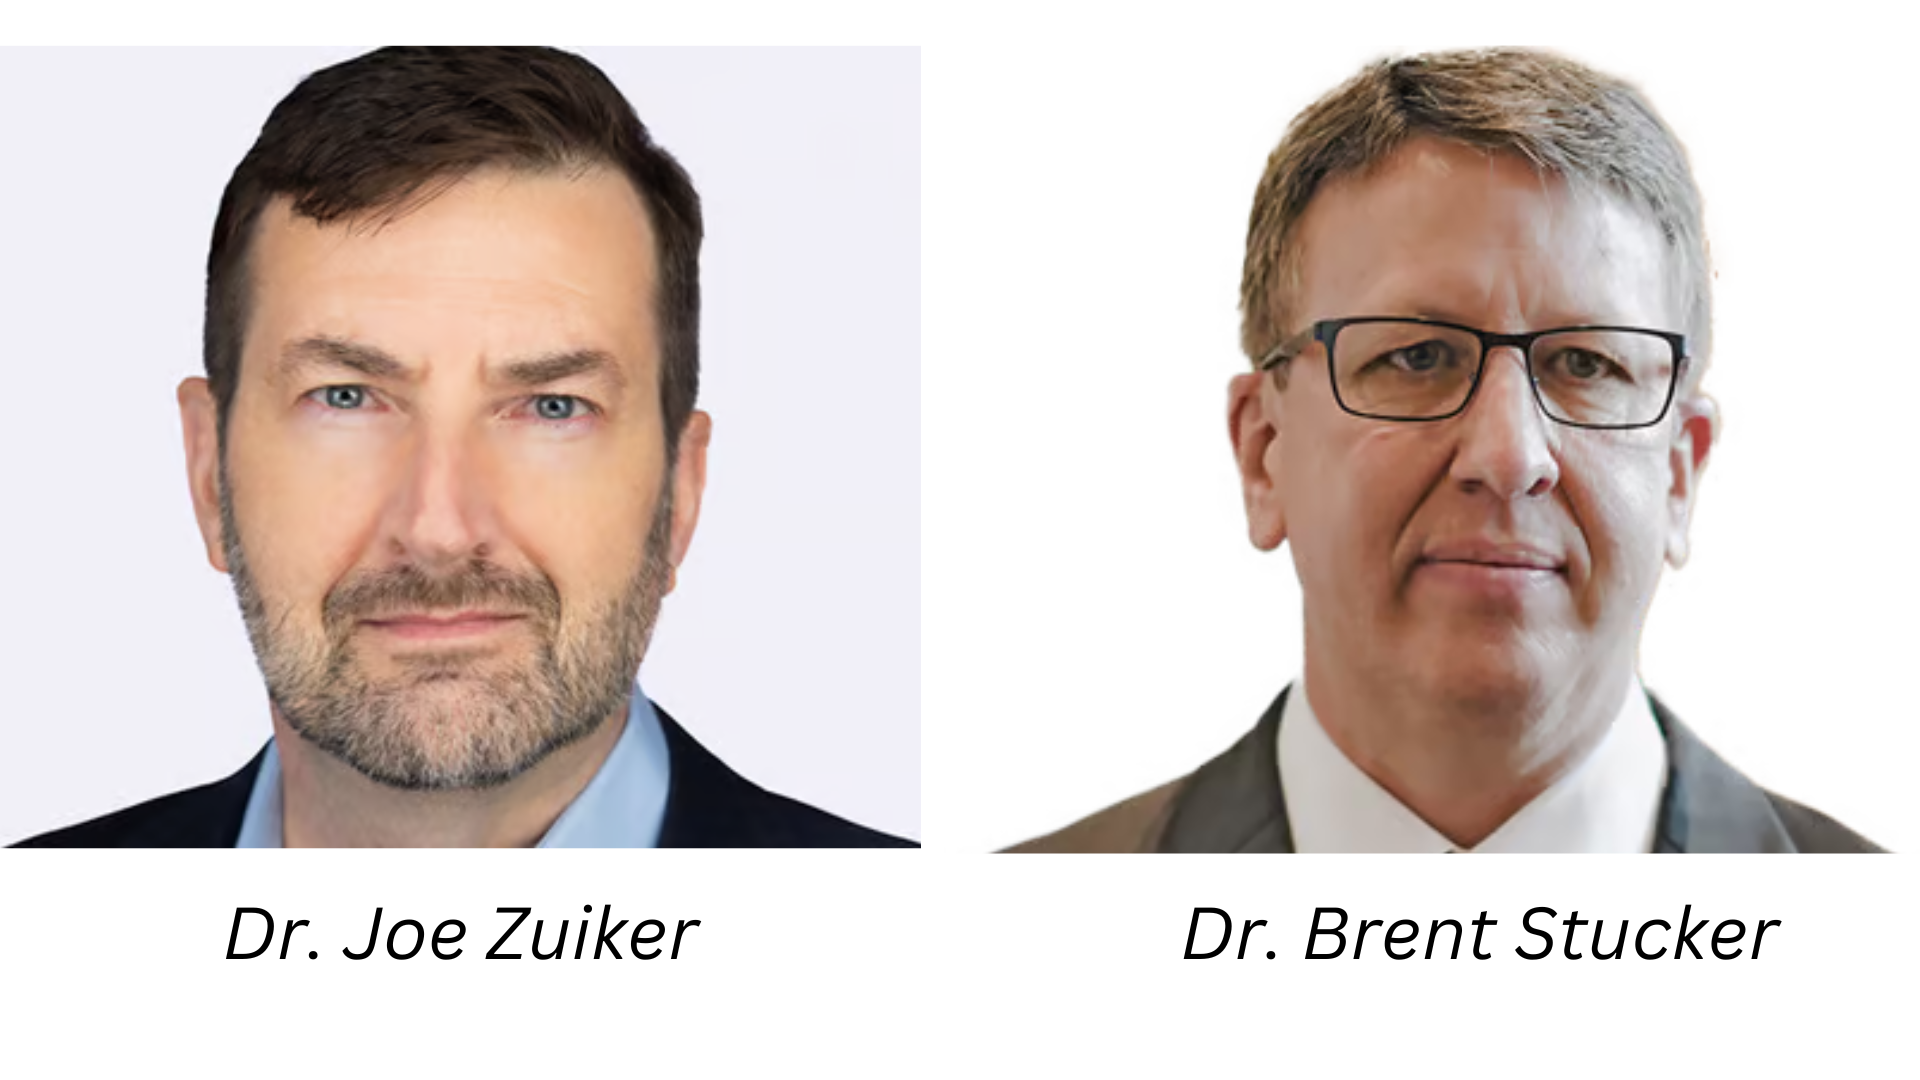 3D Systems named Dr. Joe Zuiker and Dr. Brent Stucker as executive leaders reporting directly to Dr. Jeffrey Graves, president and CEO.